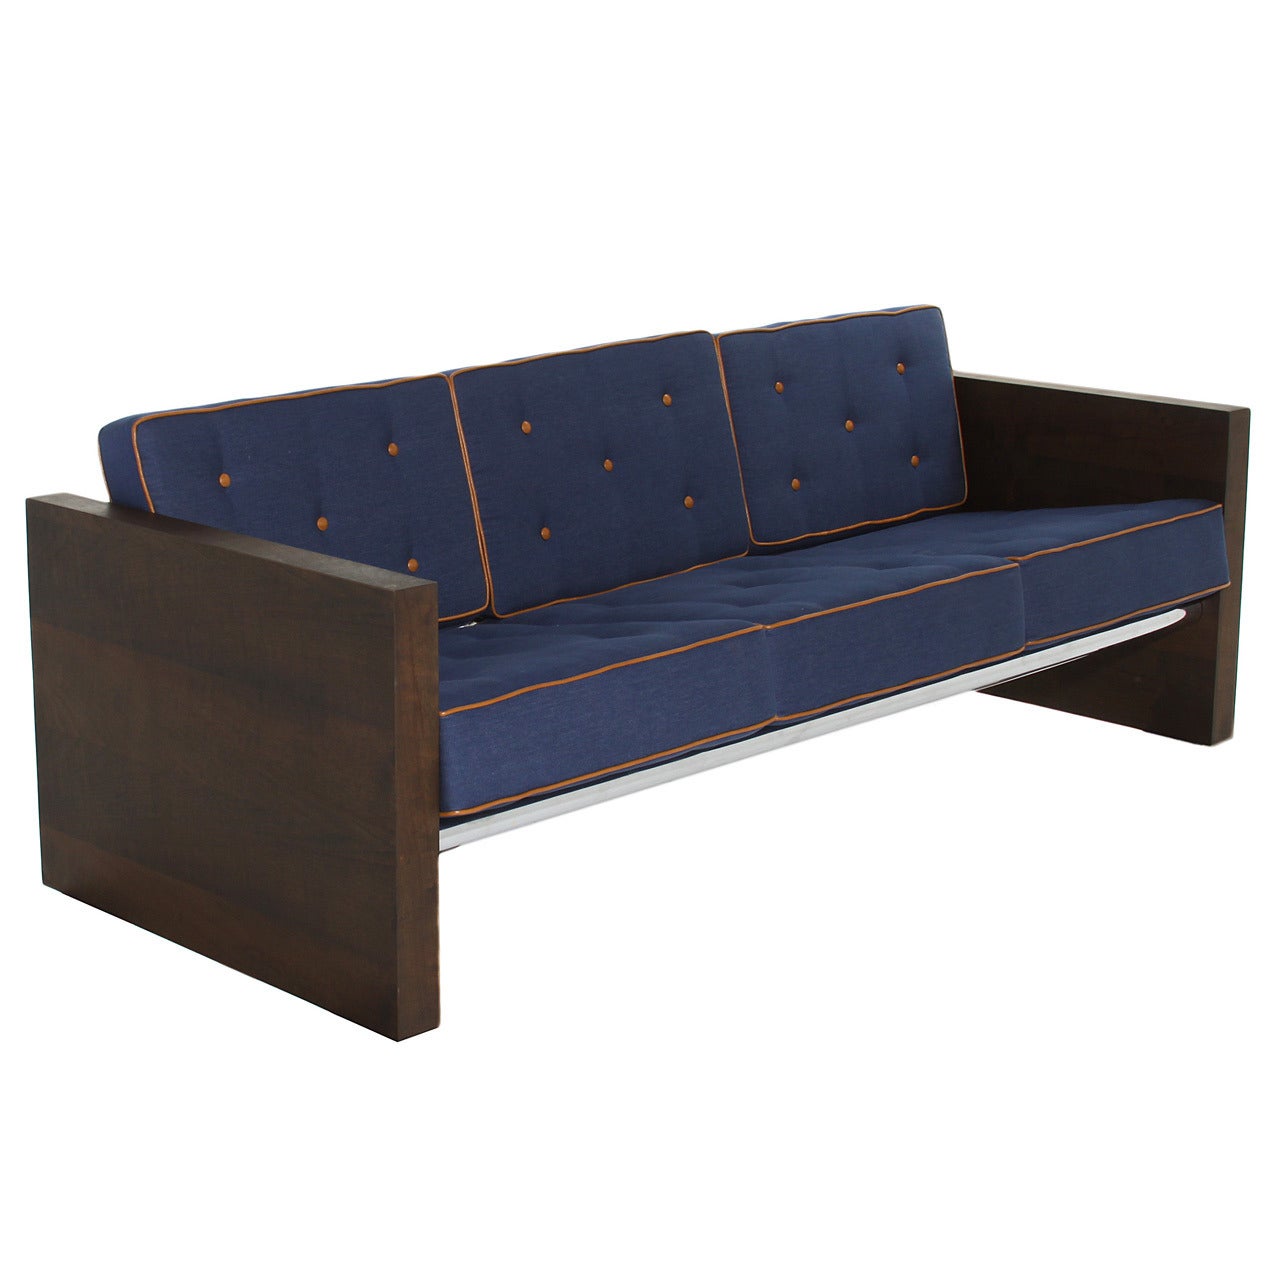 Solid Walnut Sofa Upholstered in Blue Denim with Leather Accents For Sale